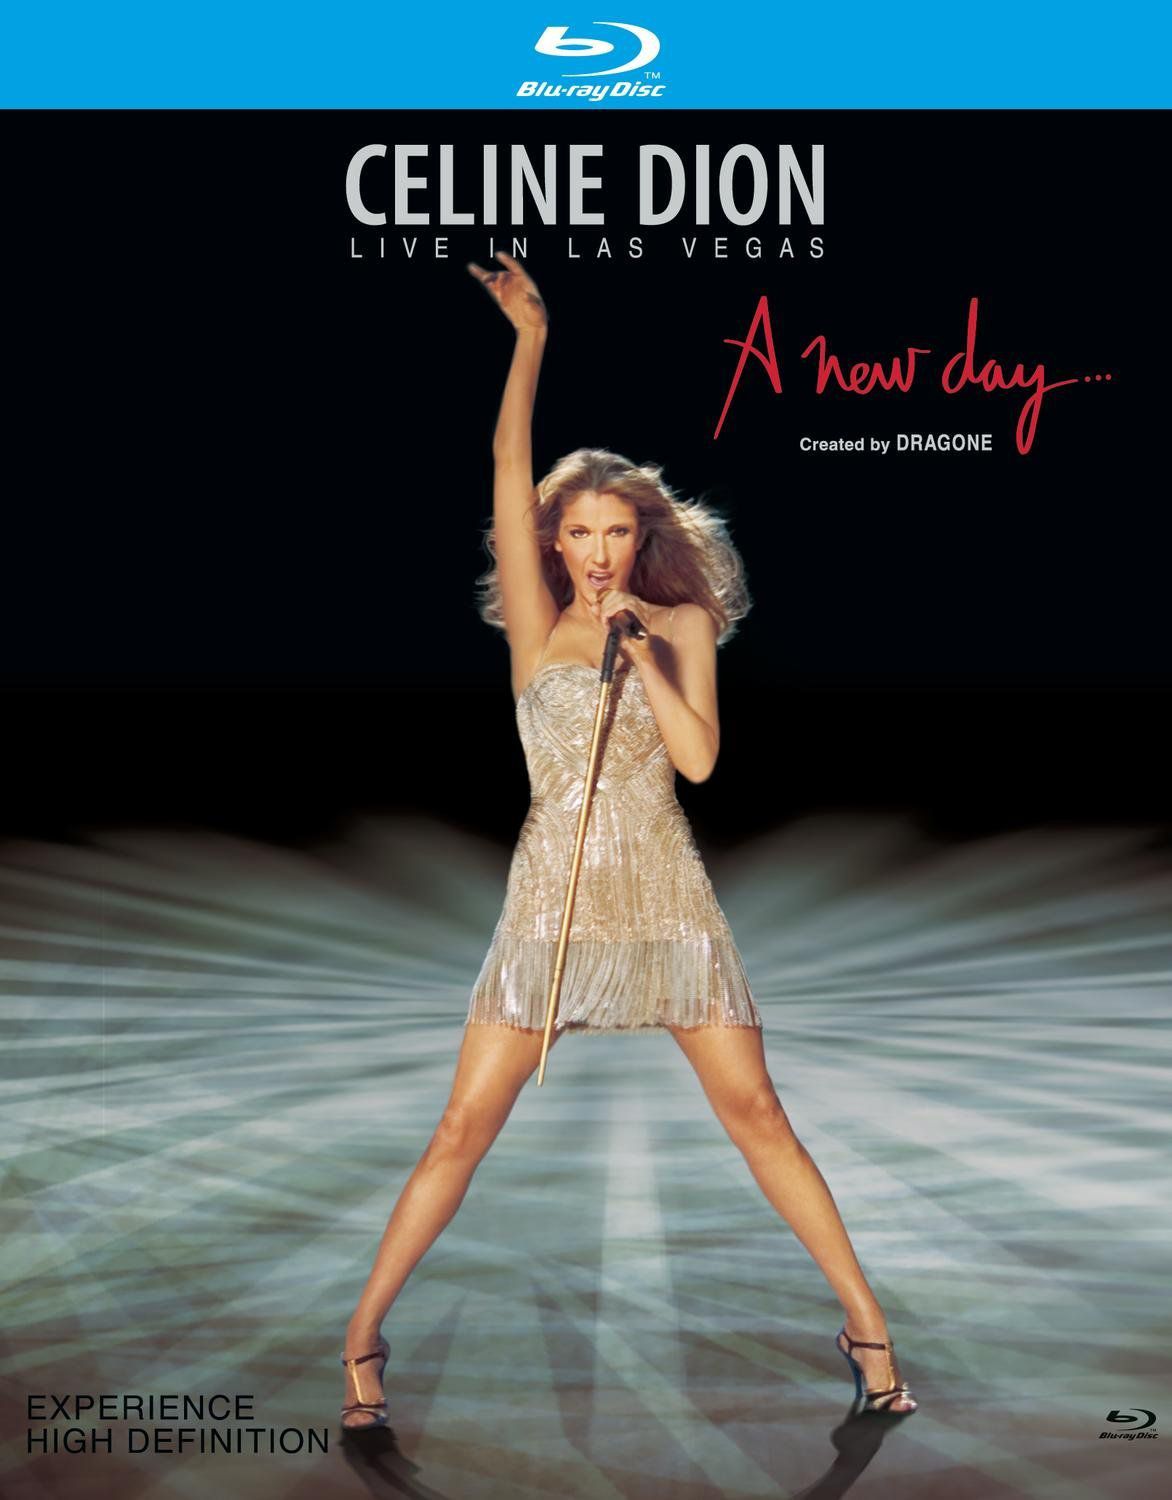 Celine Dion - Live in Las Vegas: A New Day